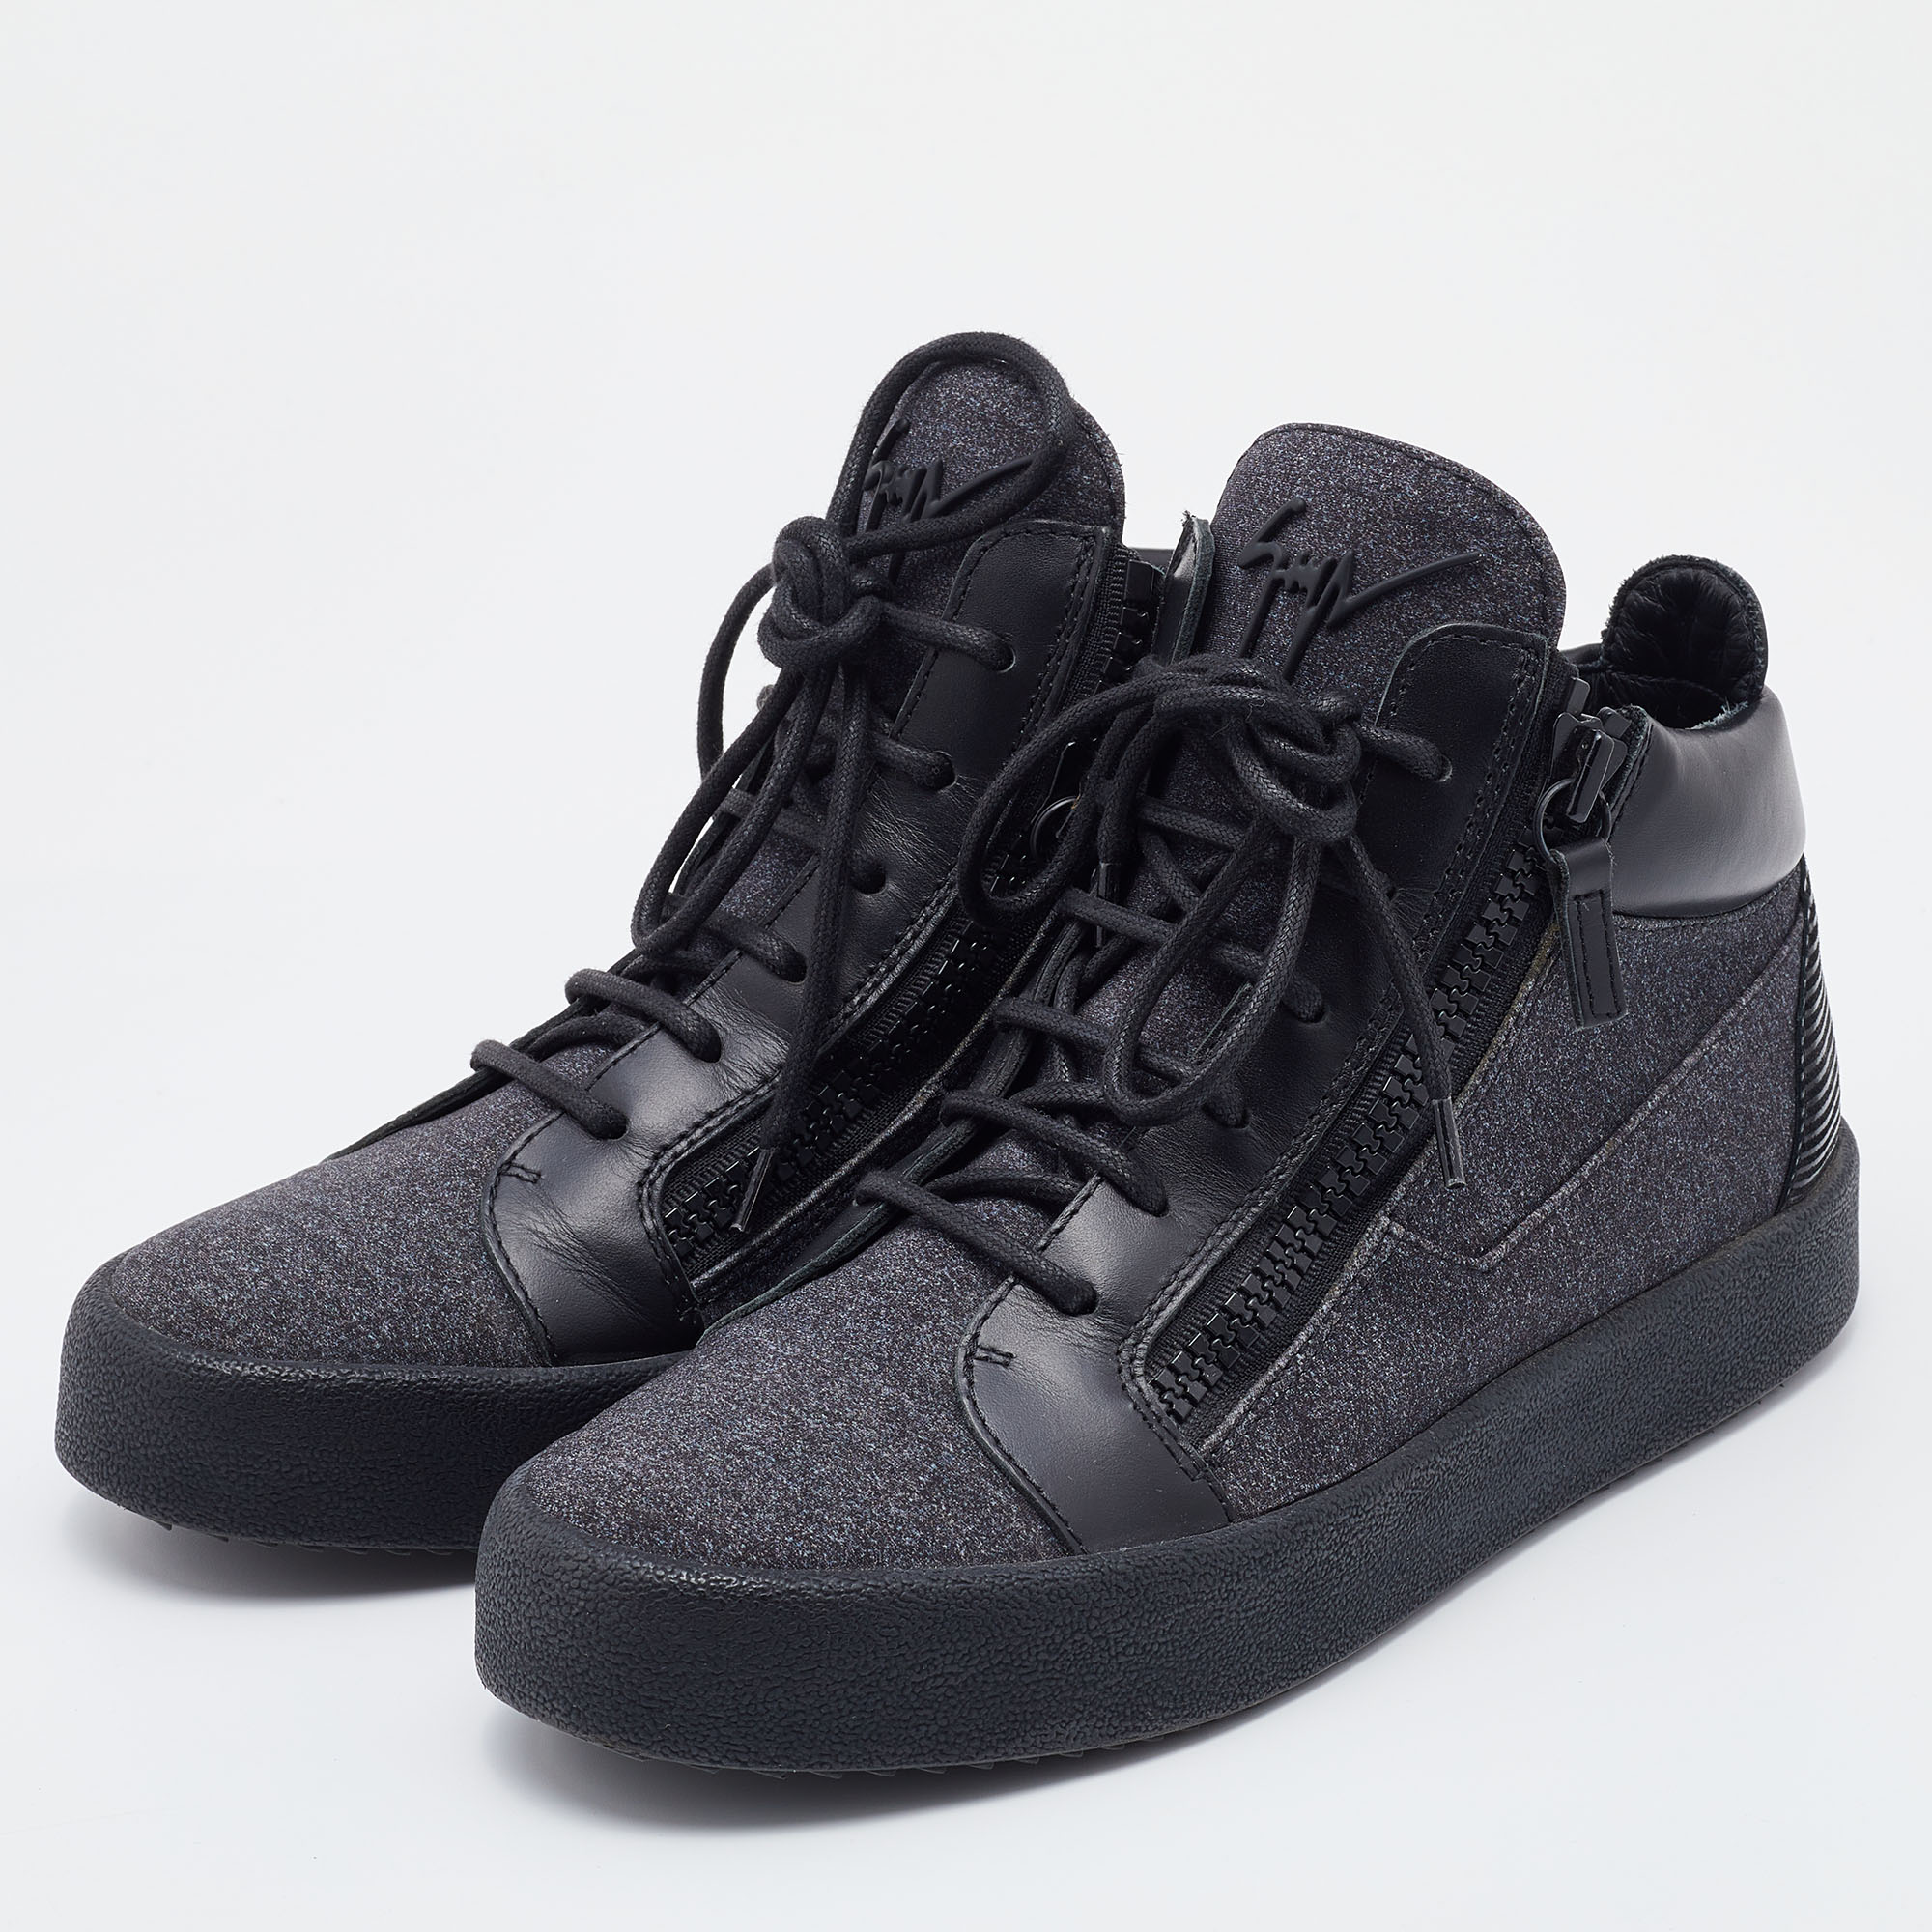 

Giuseppe Zanotti Black/Grey Fabric and Leather Kriss High Top Sneakers Size